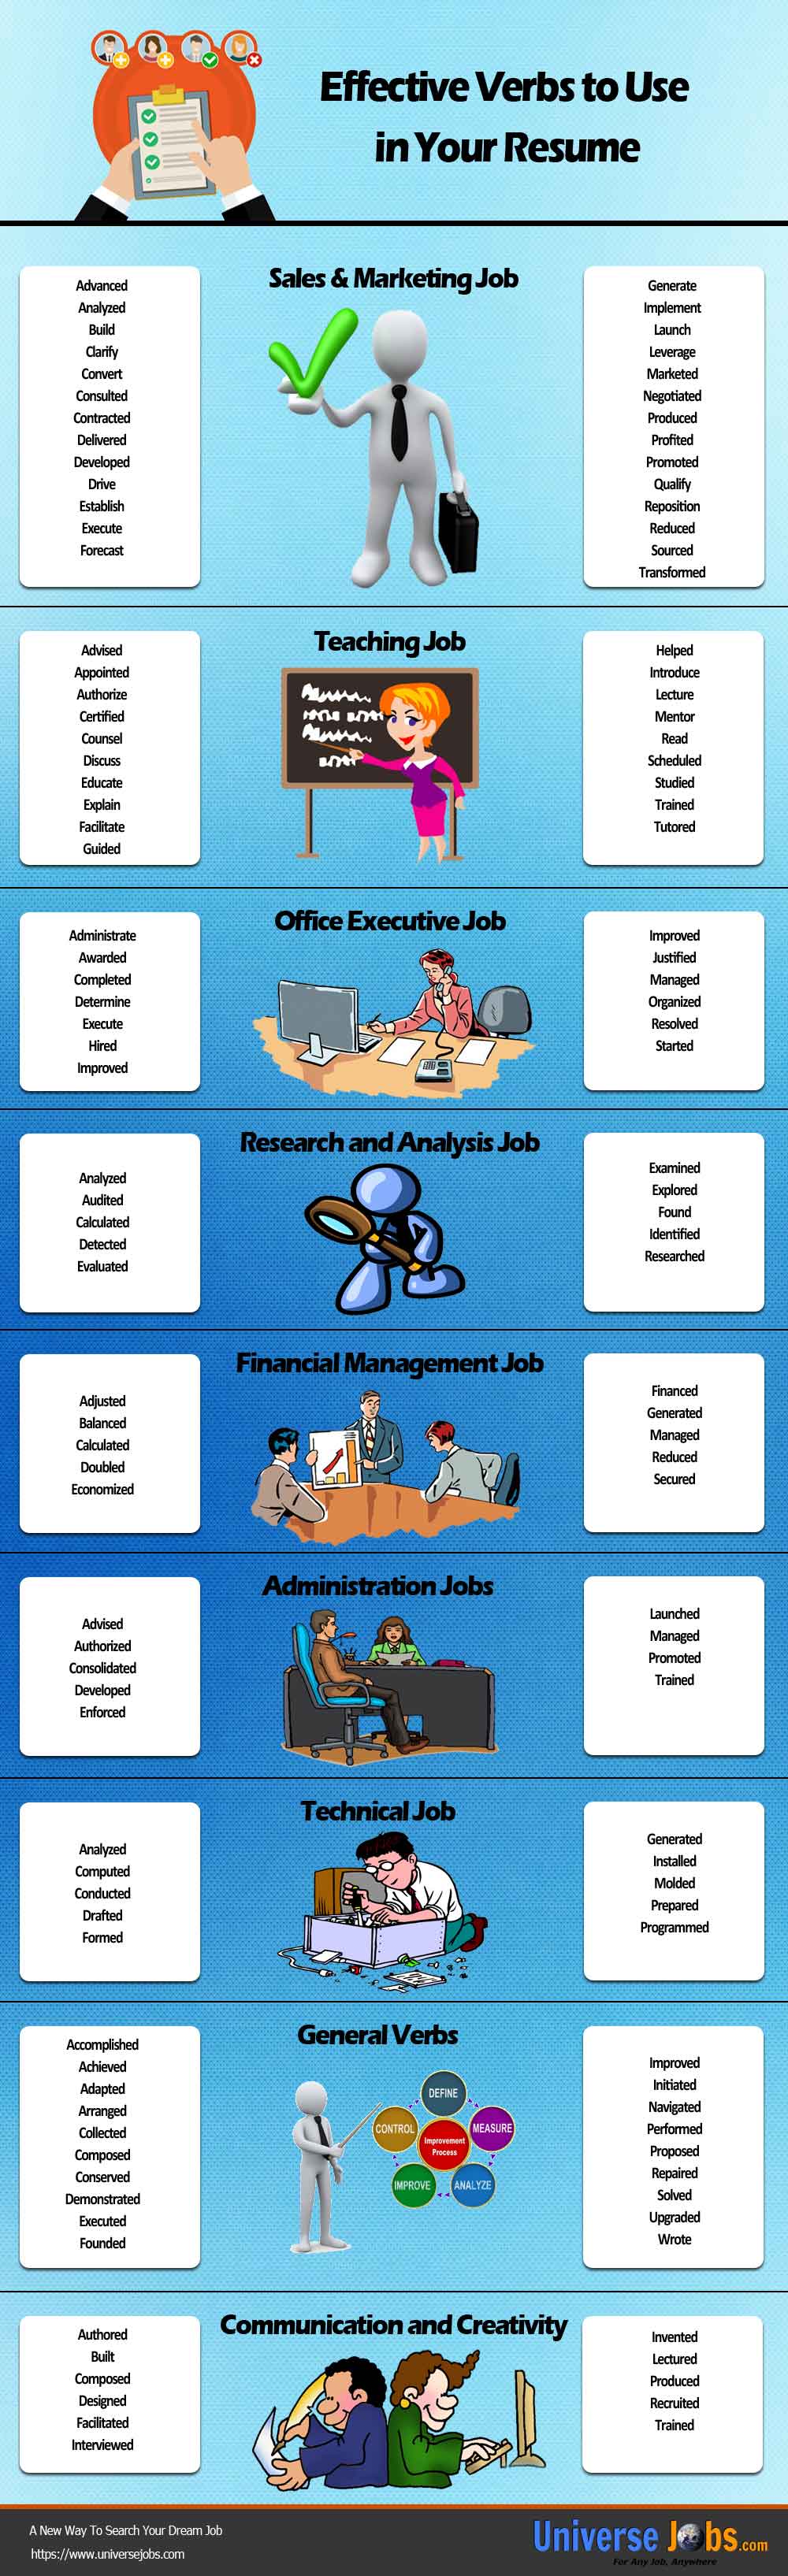 Effective-Verbs-To-Use-In-Your-Resume